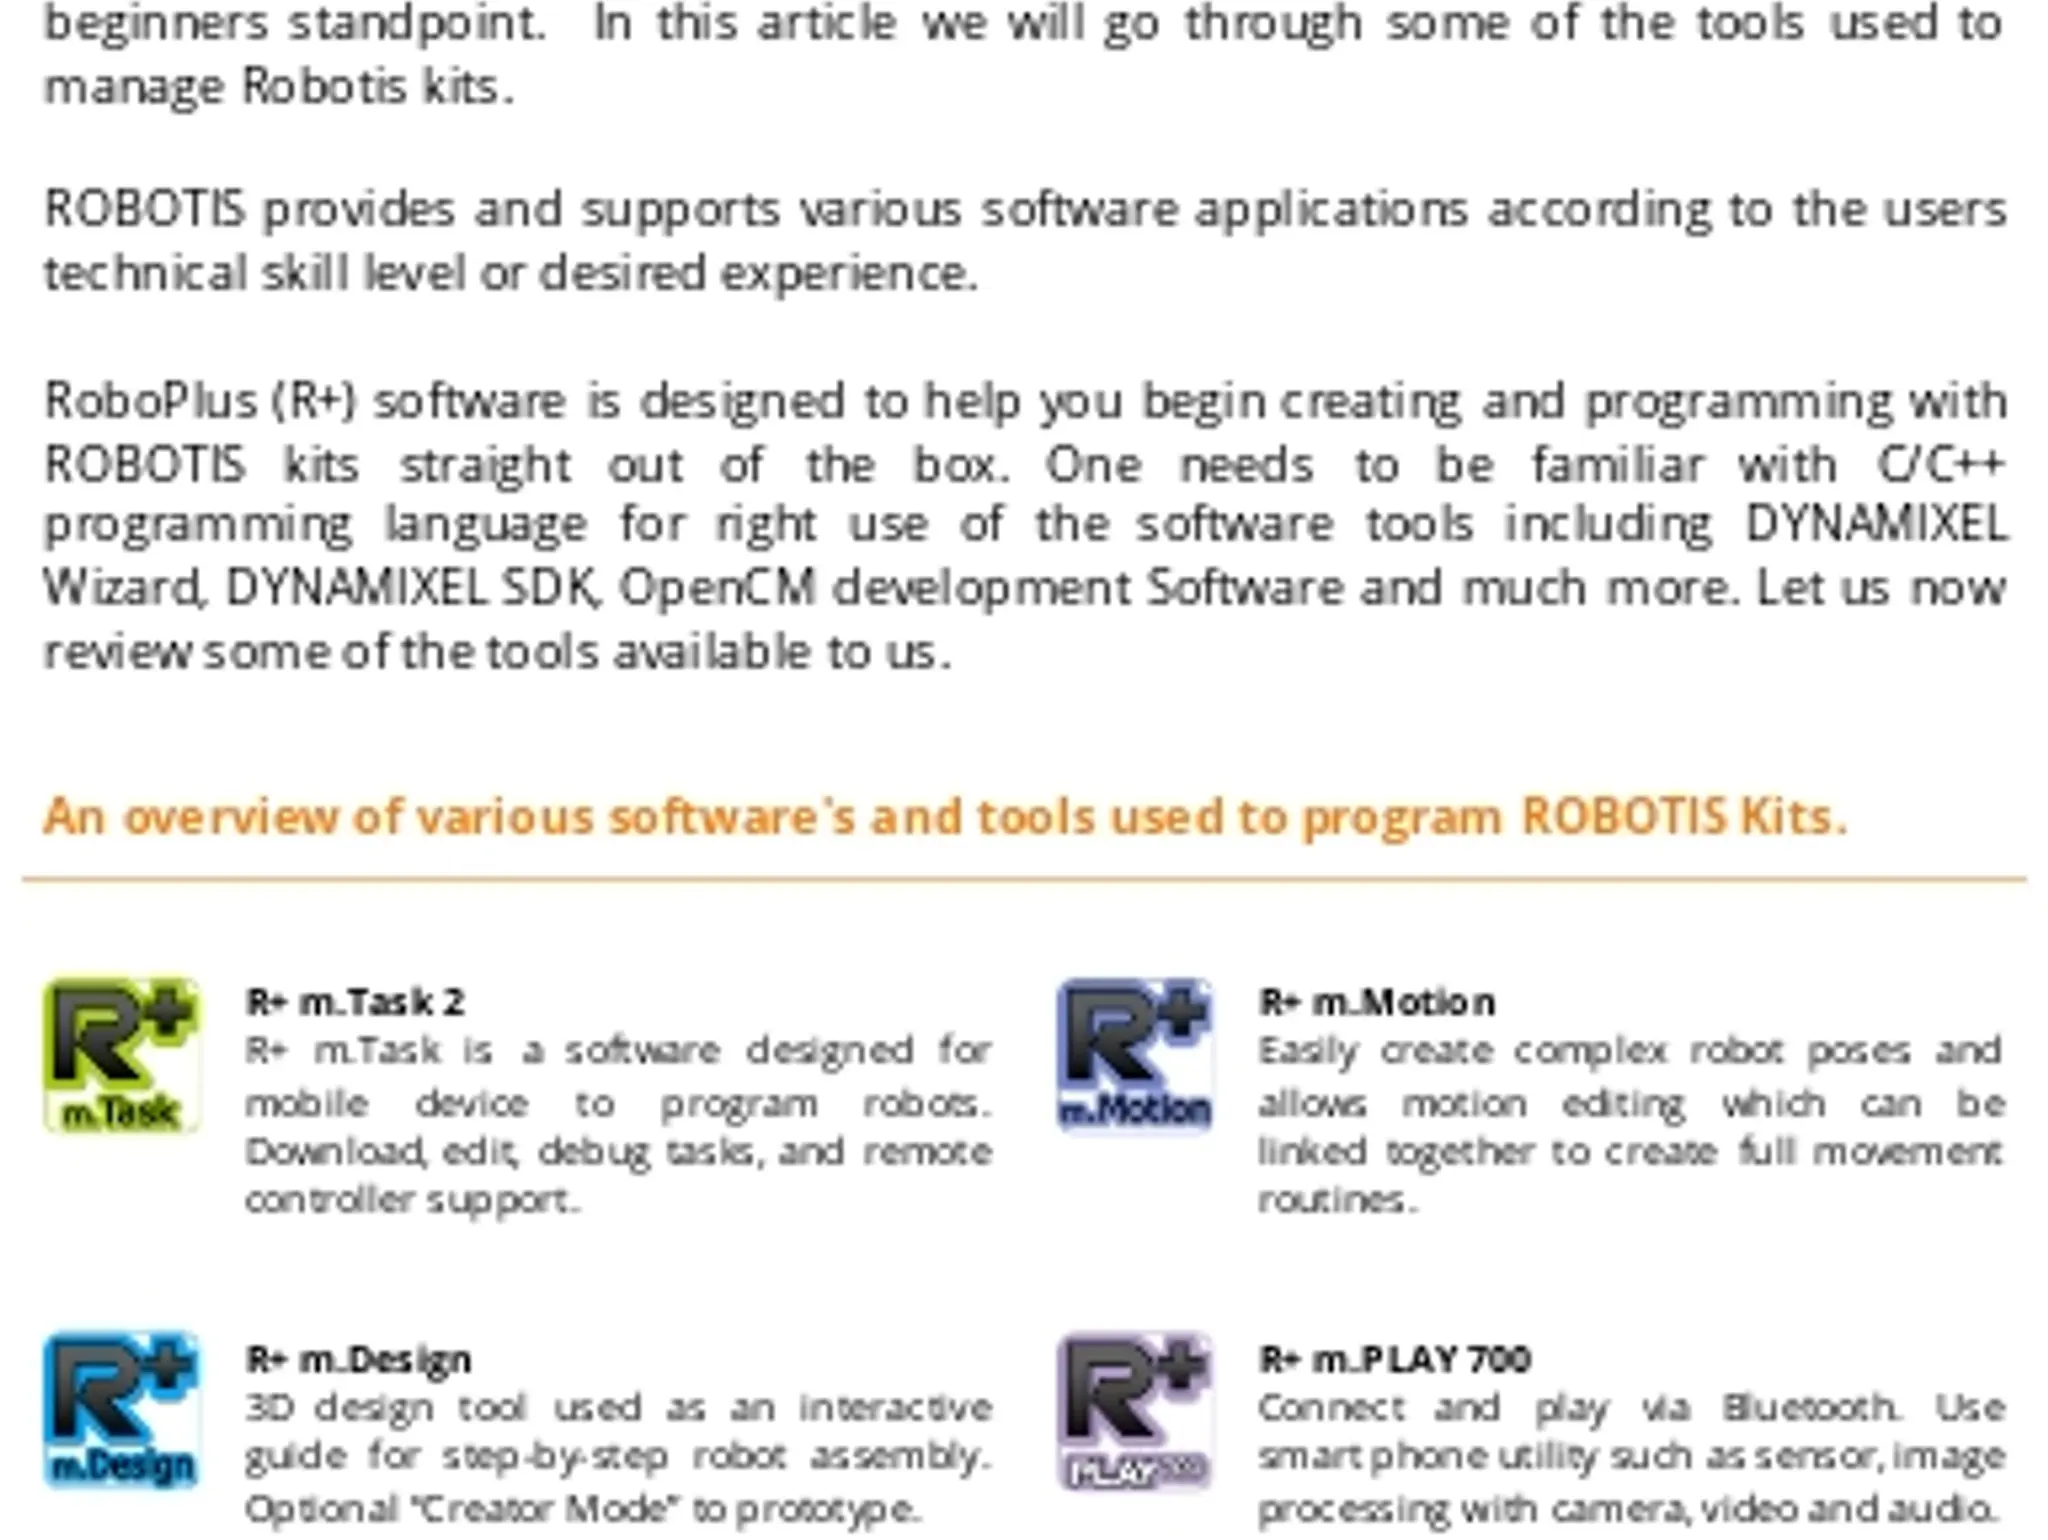 ROBOTIS and Software Applications